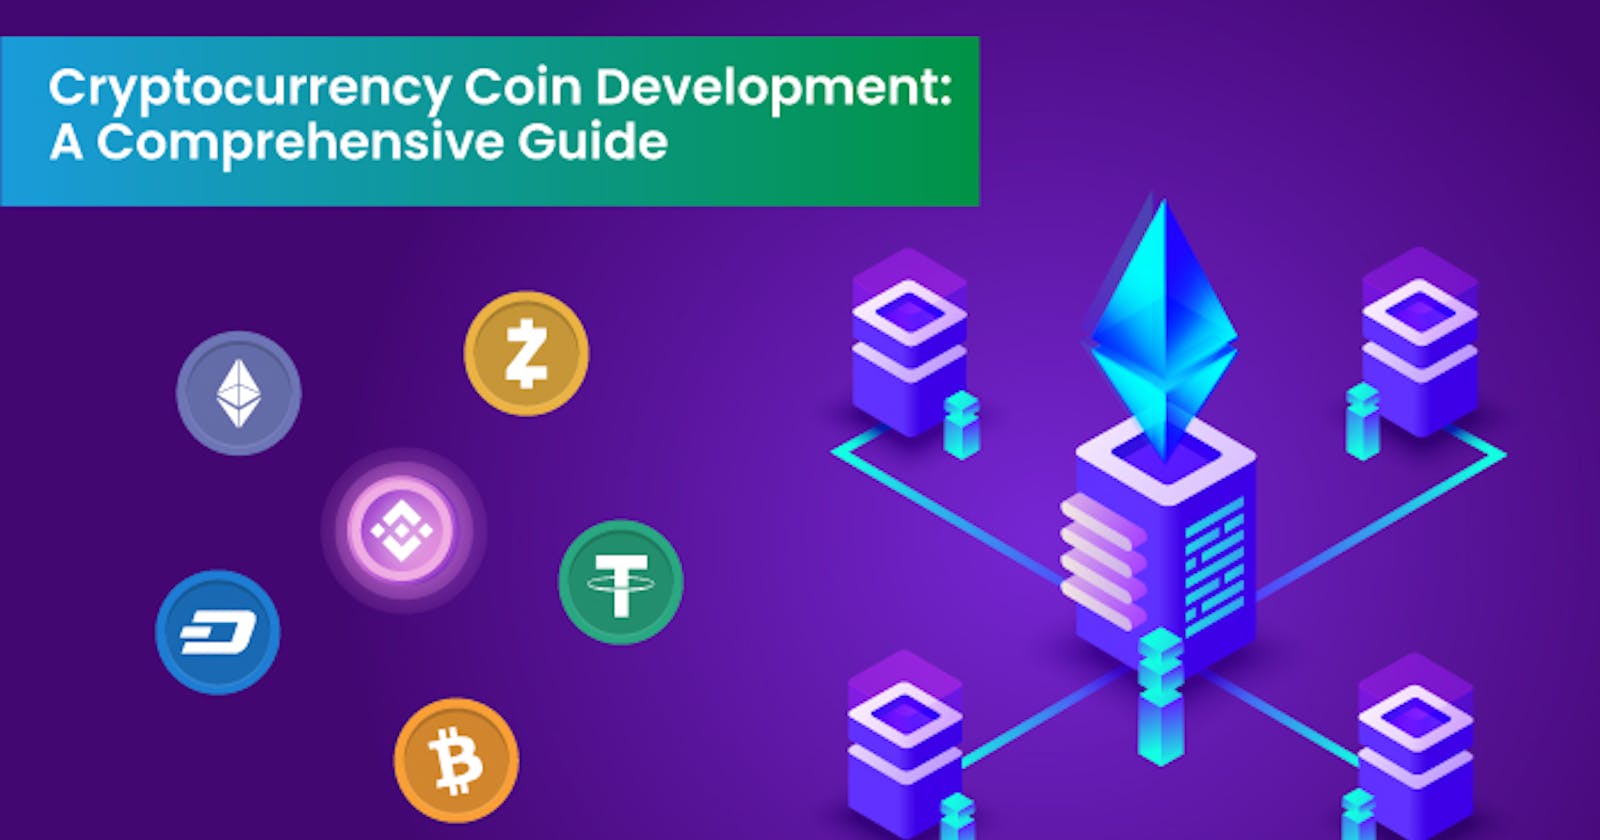 Cryptocurrency Coin Development: How to Create Your Own Digital Currency